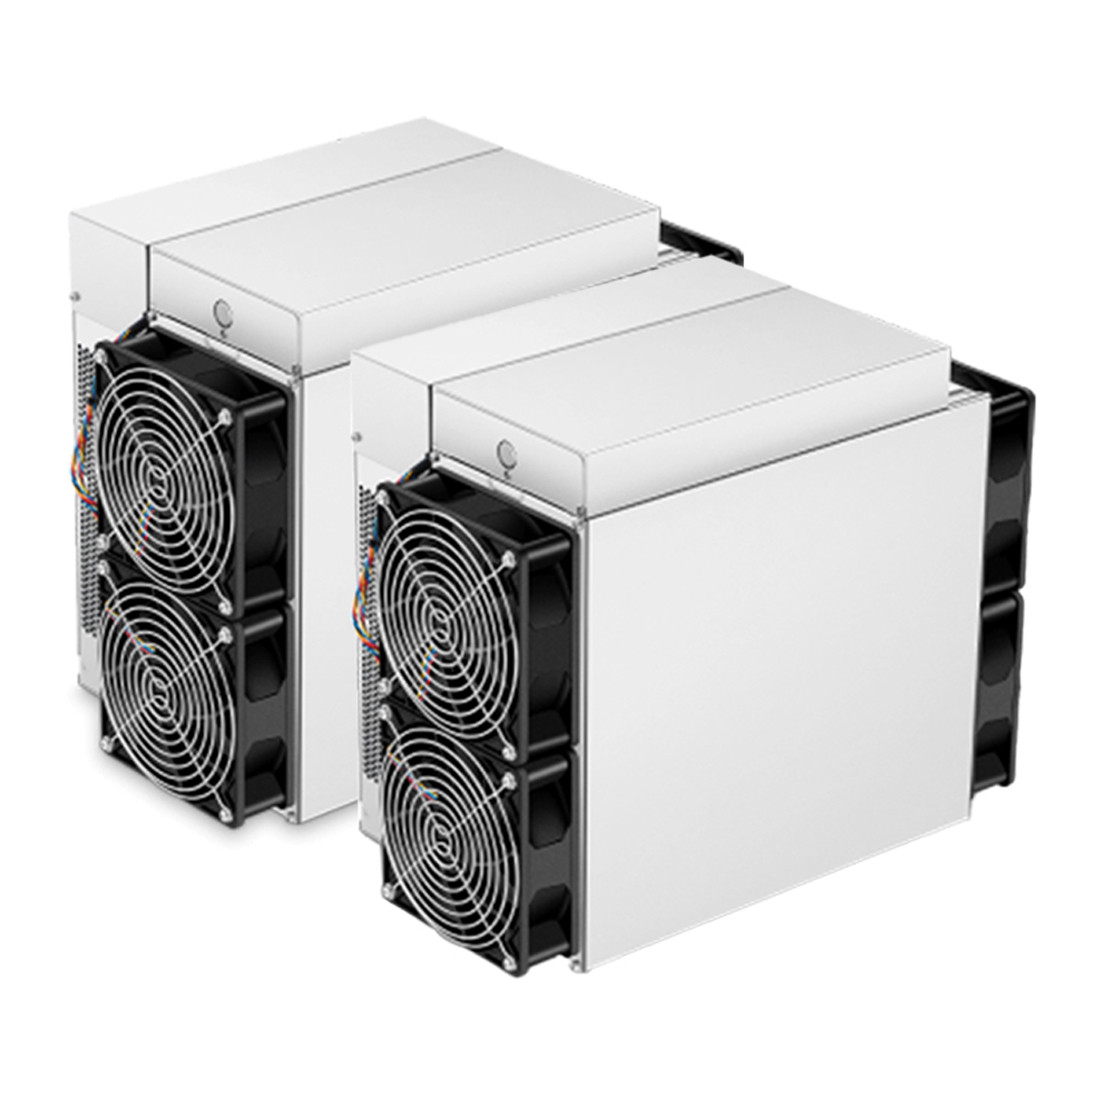 Buy cheap Power Supply 3250W Bitmain Antminer S19 Pro 110th/S Btc Bitcoin Miner from wholesalers